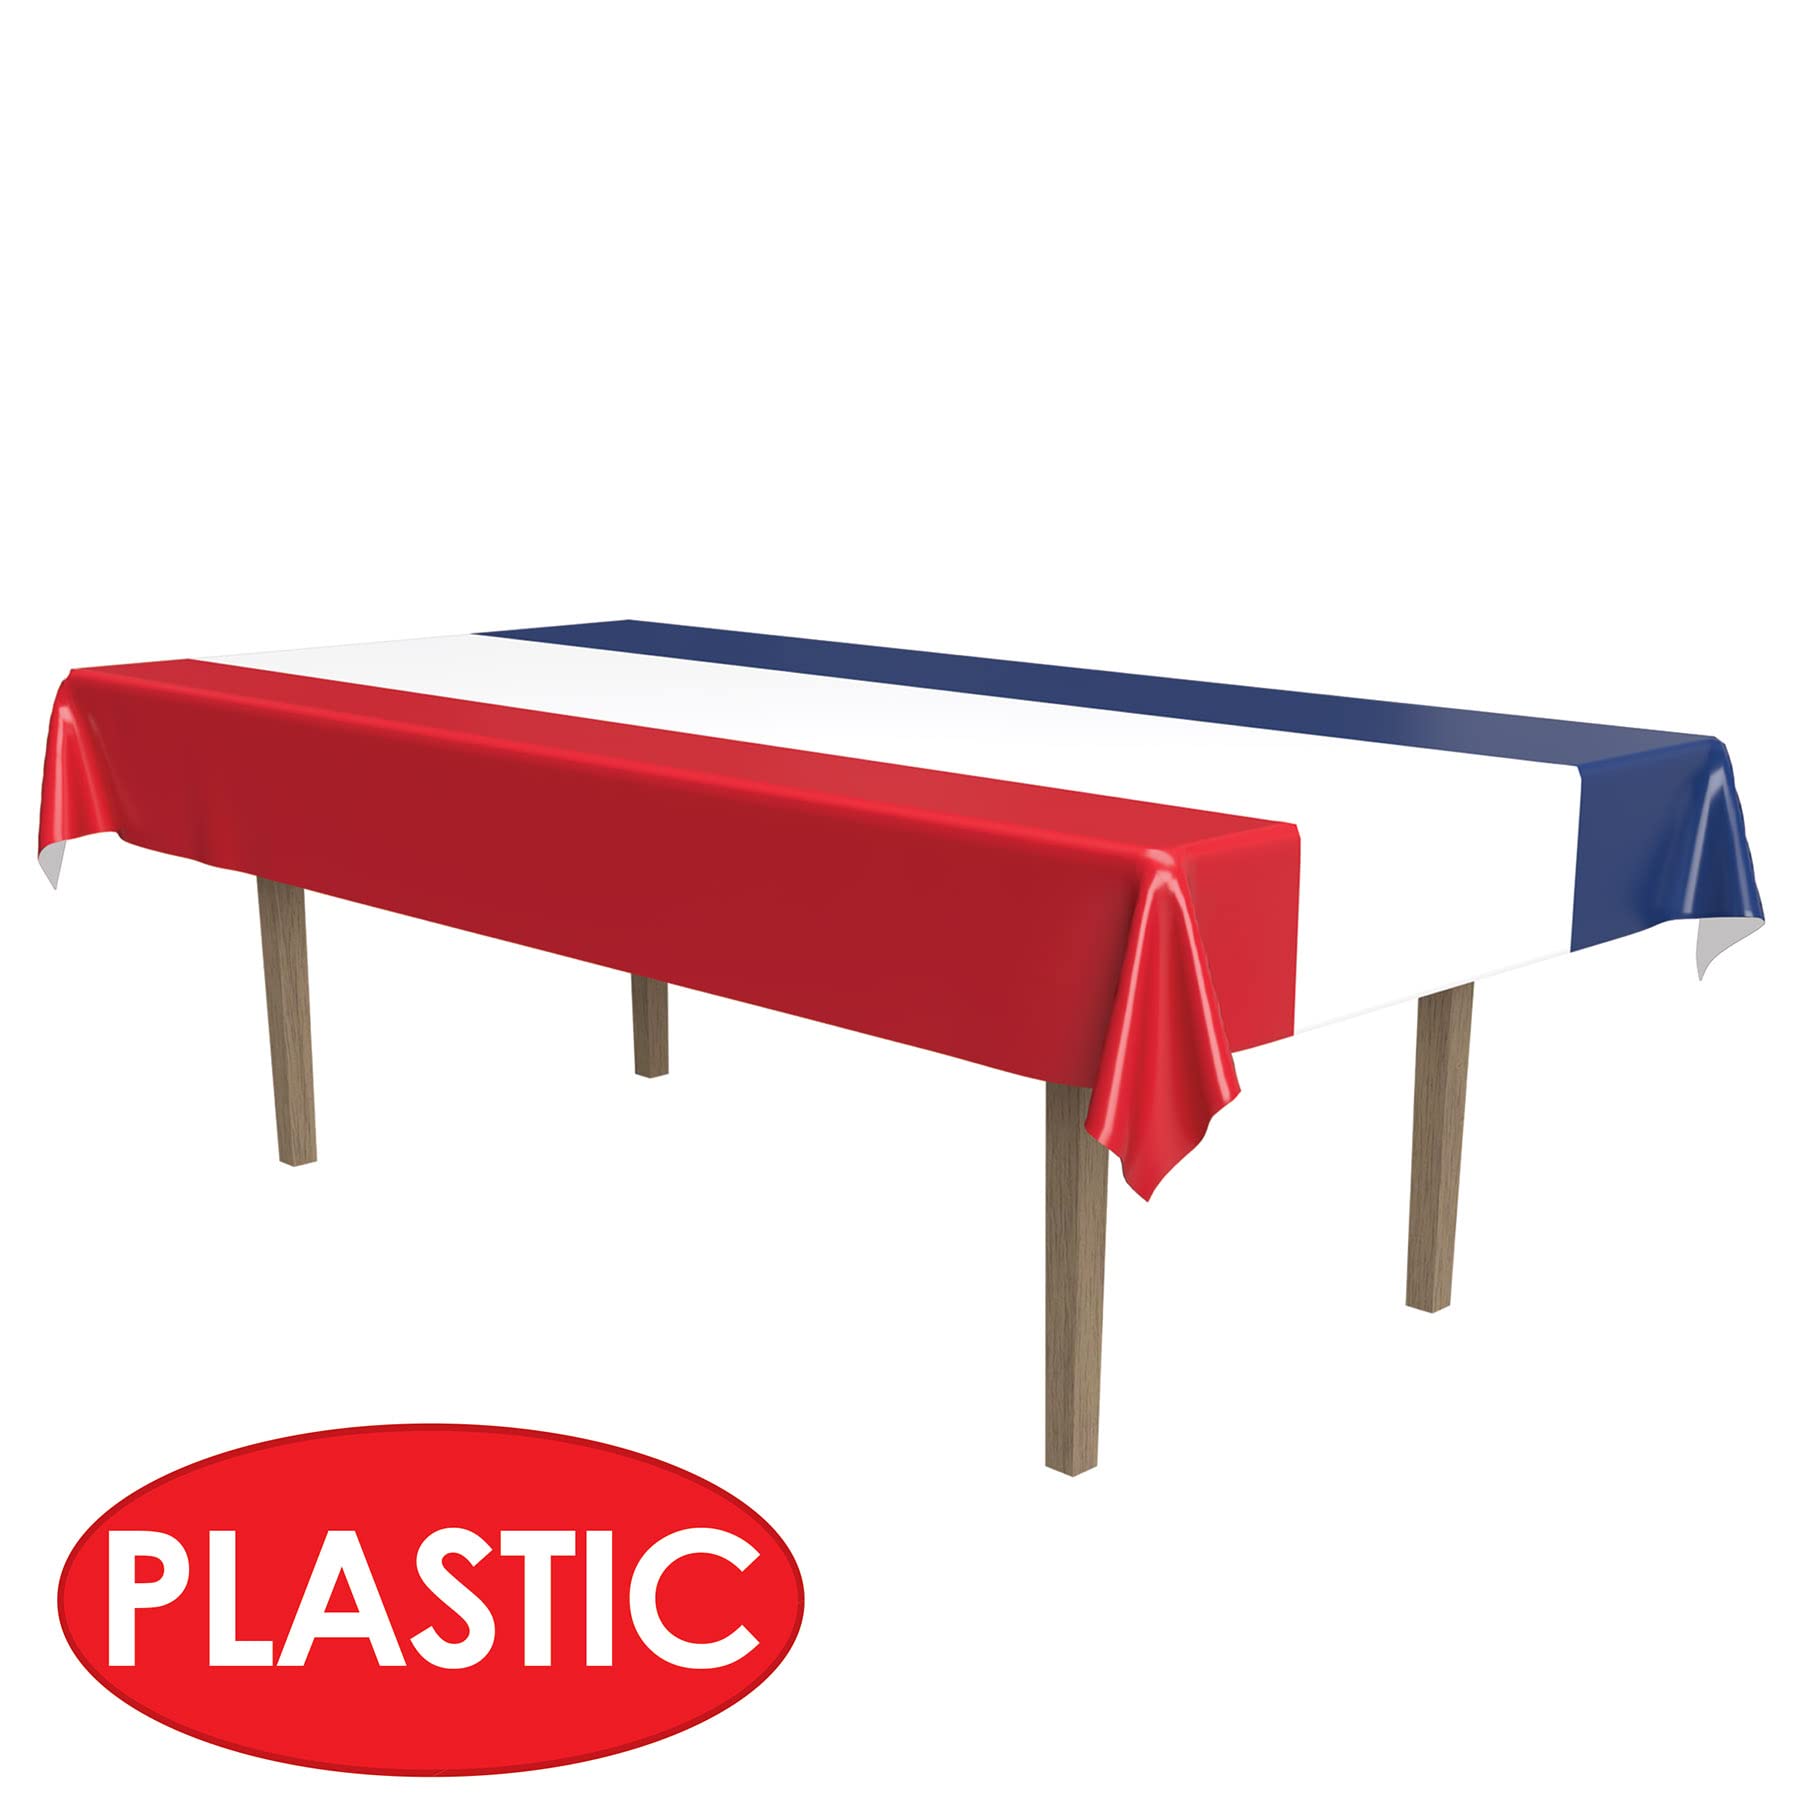 Beistle Red, White And Blue Patriotic Party Tablecover Plastic Table Cloth, Rectangular, 4th of July, Memorial Day Decorations, Disposable Tablecloth, 54